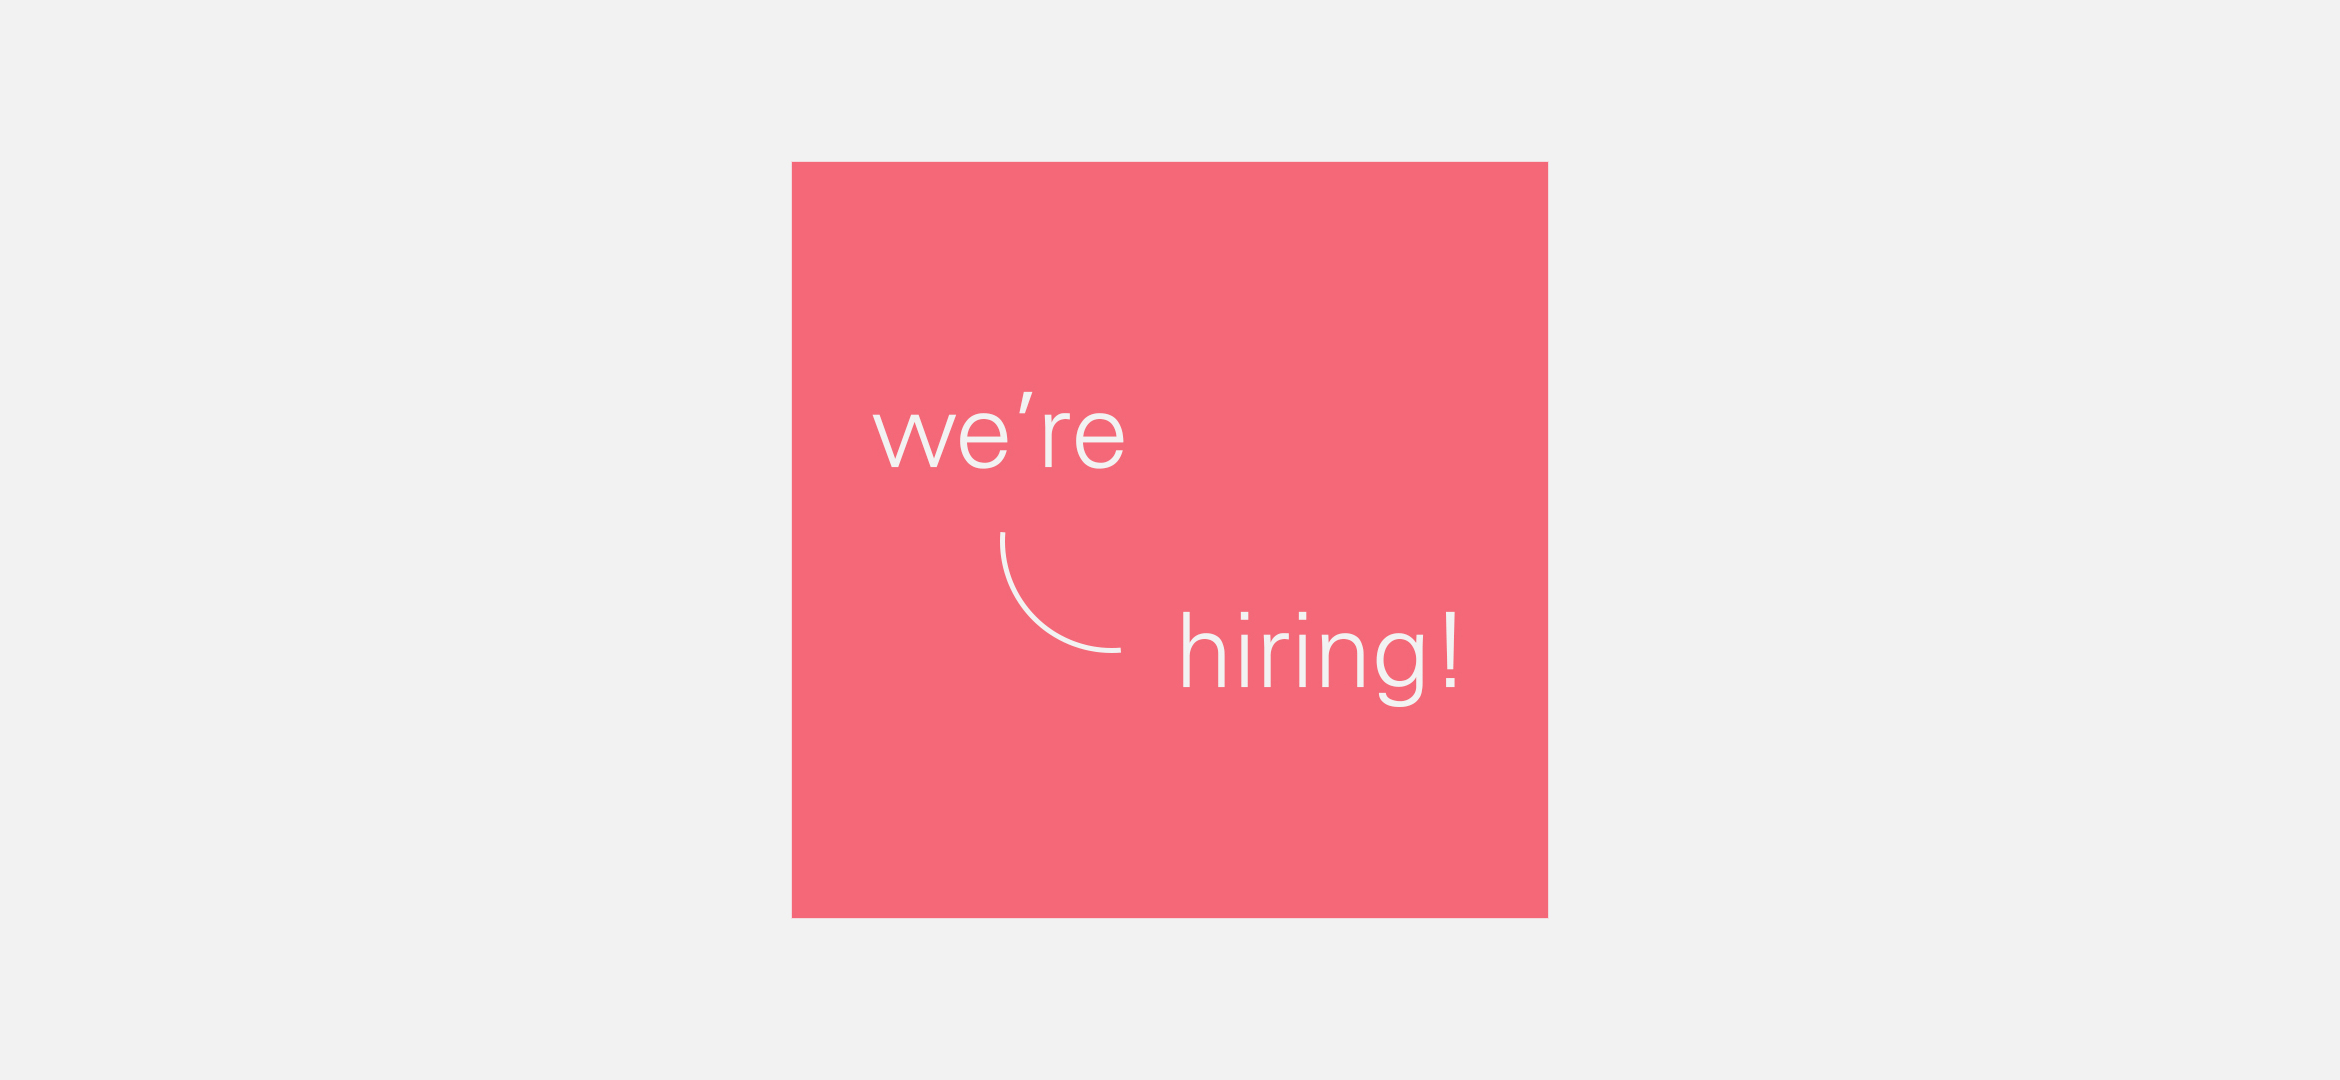 We are hiring! Part 1 architectural assistant